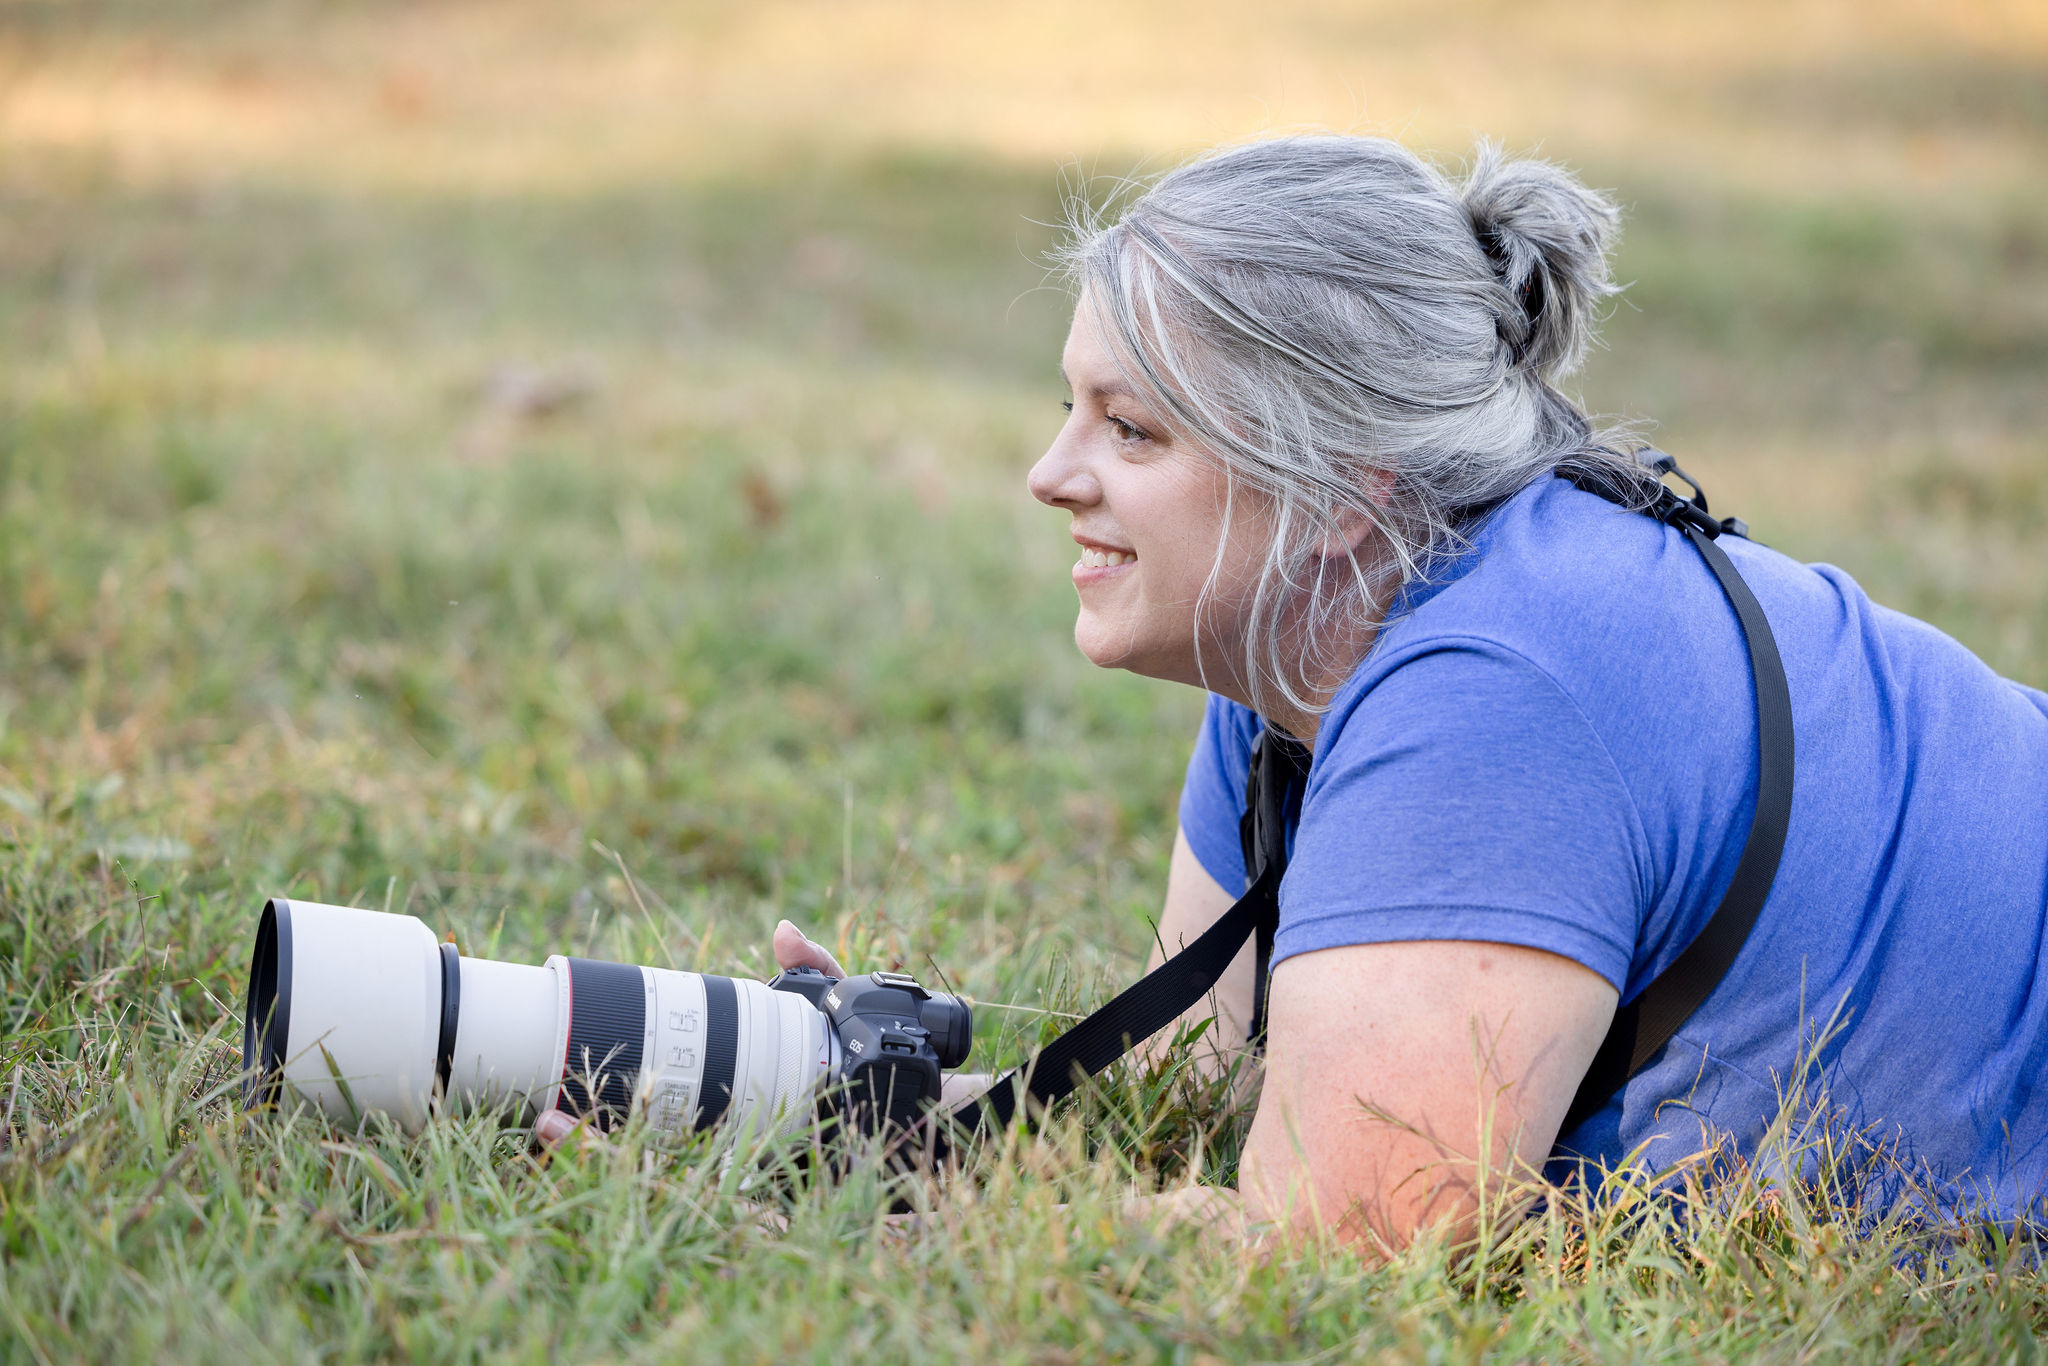 Betsy Bird, Pet and Horse Photographer based in Chattanooga, TN